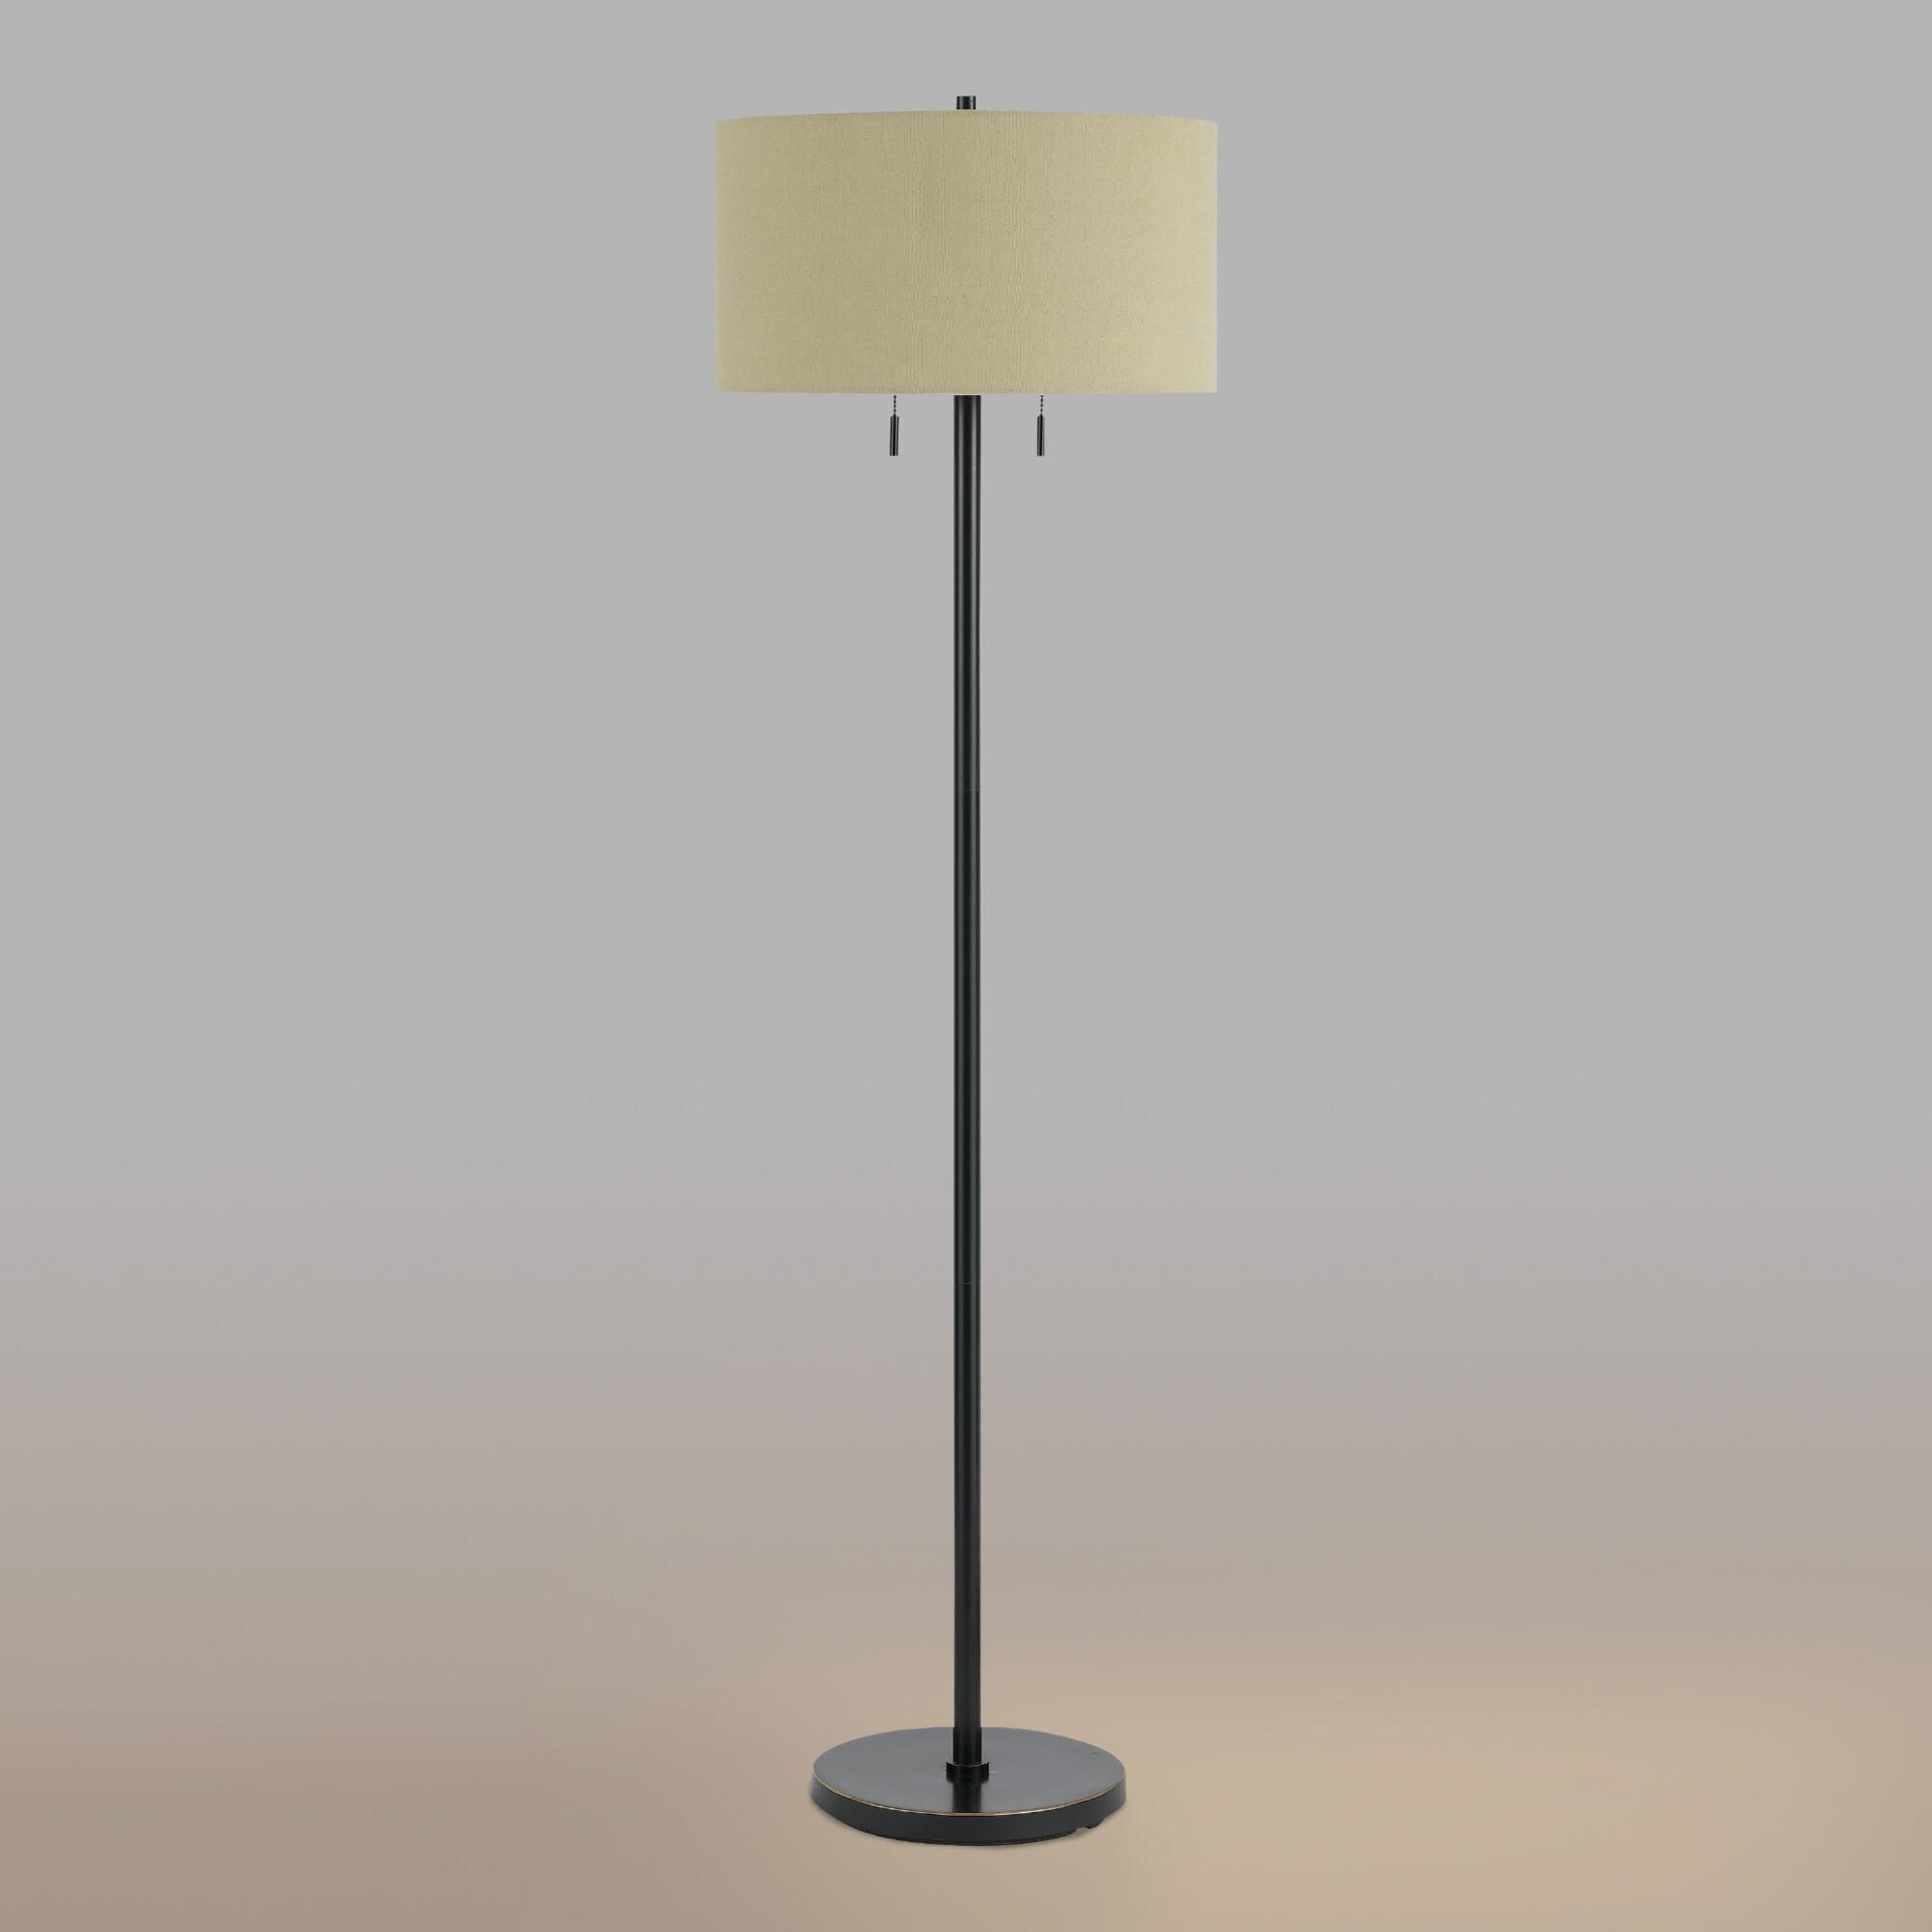 Contemporary And Statuesque Our Calais Floor Lamp Offers with sizing 2000 X 2000